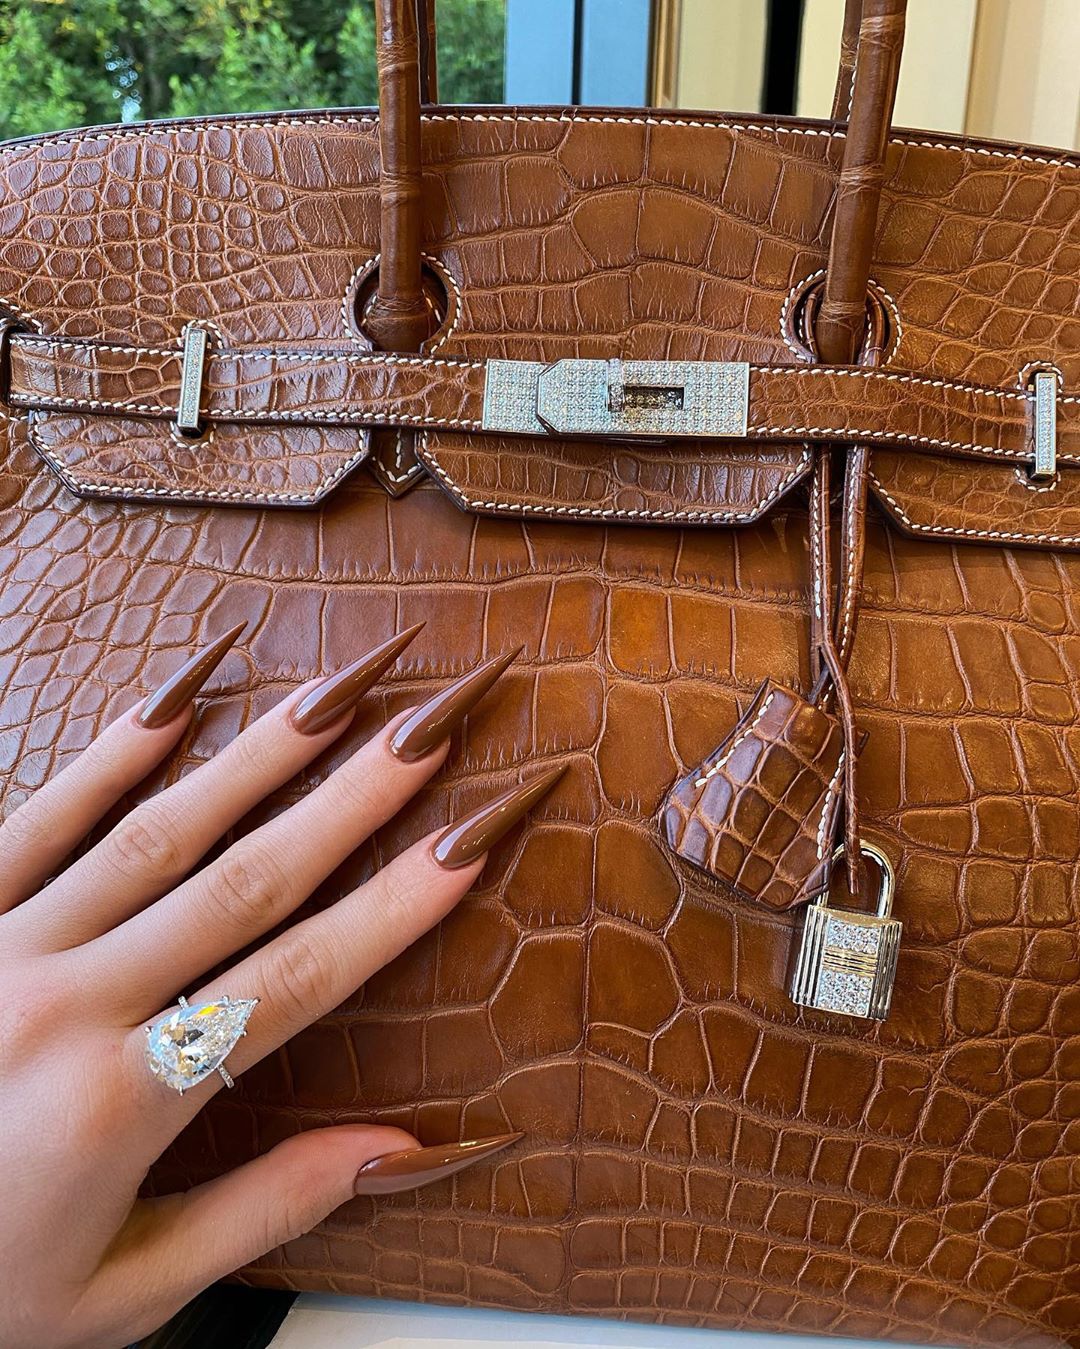 Kylie Jenner matches her manicure to her $300K Birkin bag